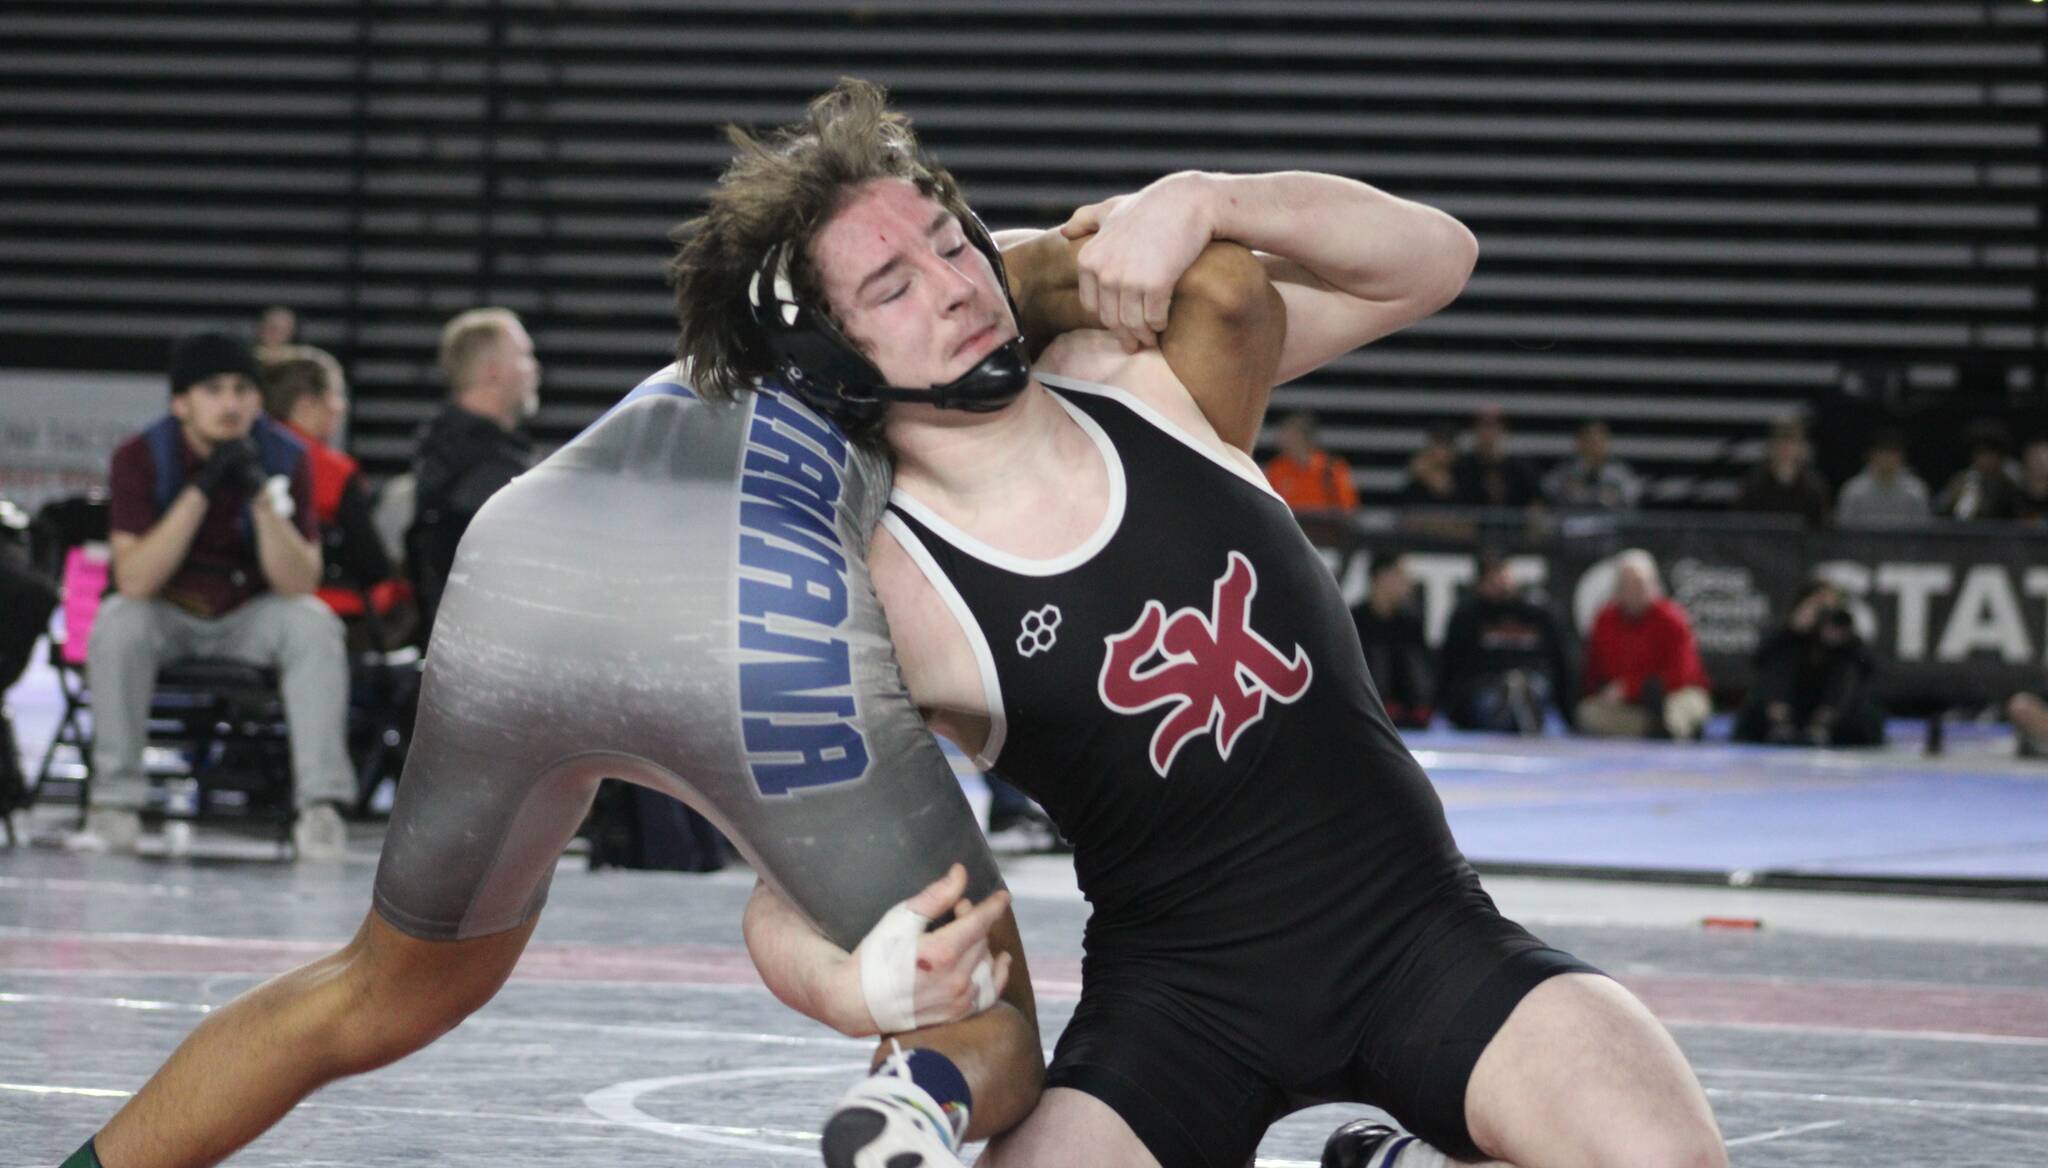 Elisha Meyer/Kitsap News Group Photos
Senior Stone Hartford keeps hold of his opponent en route to winning the state championship bout.